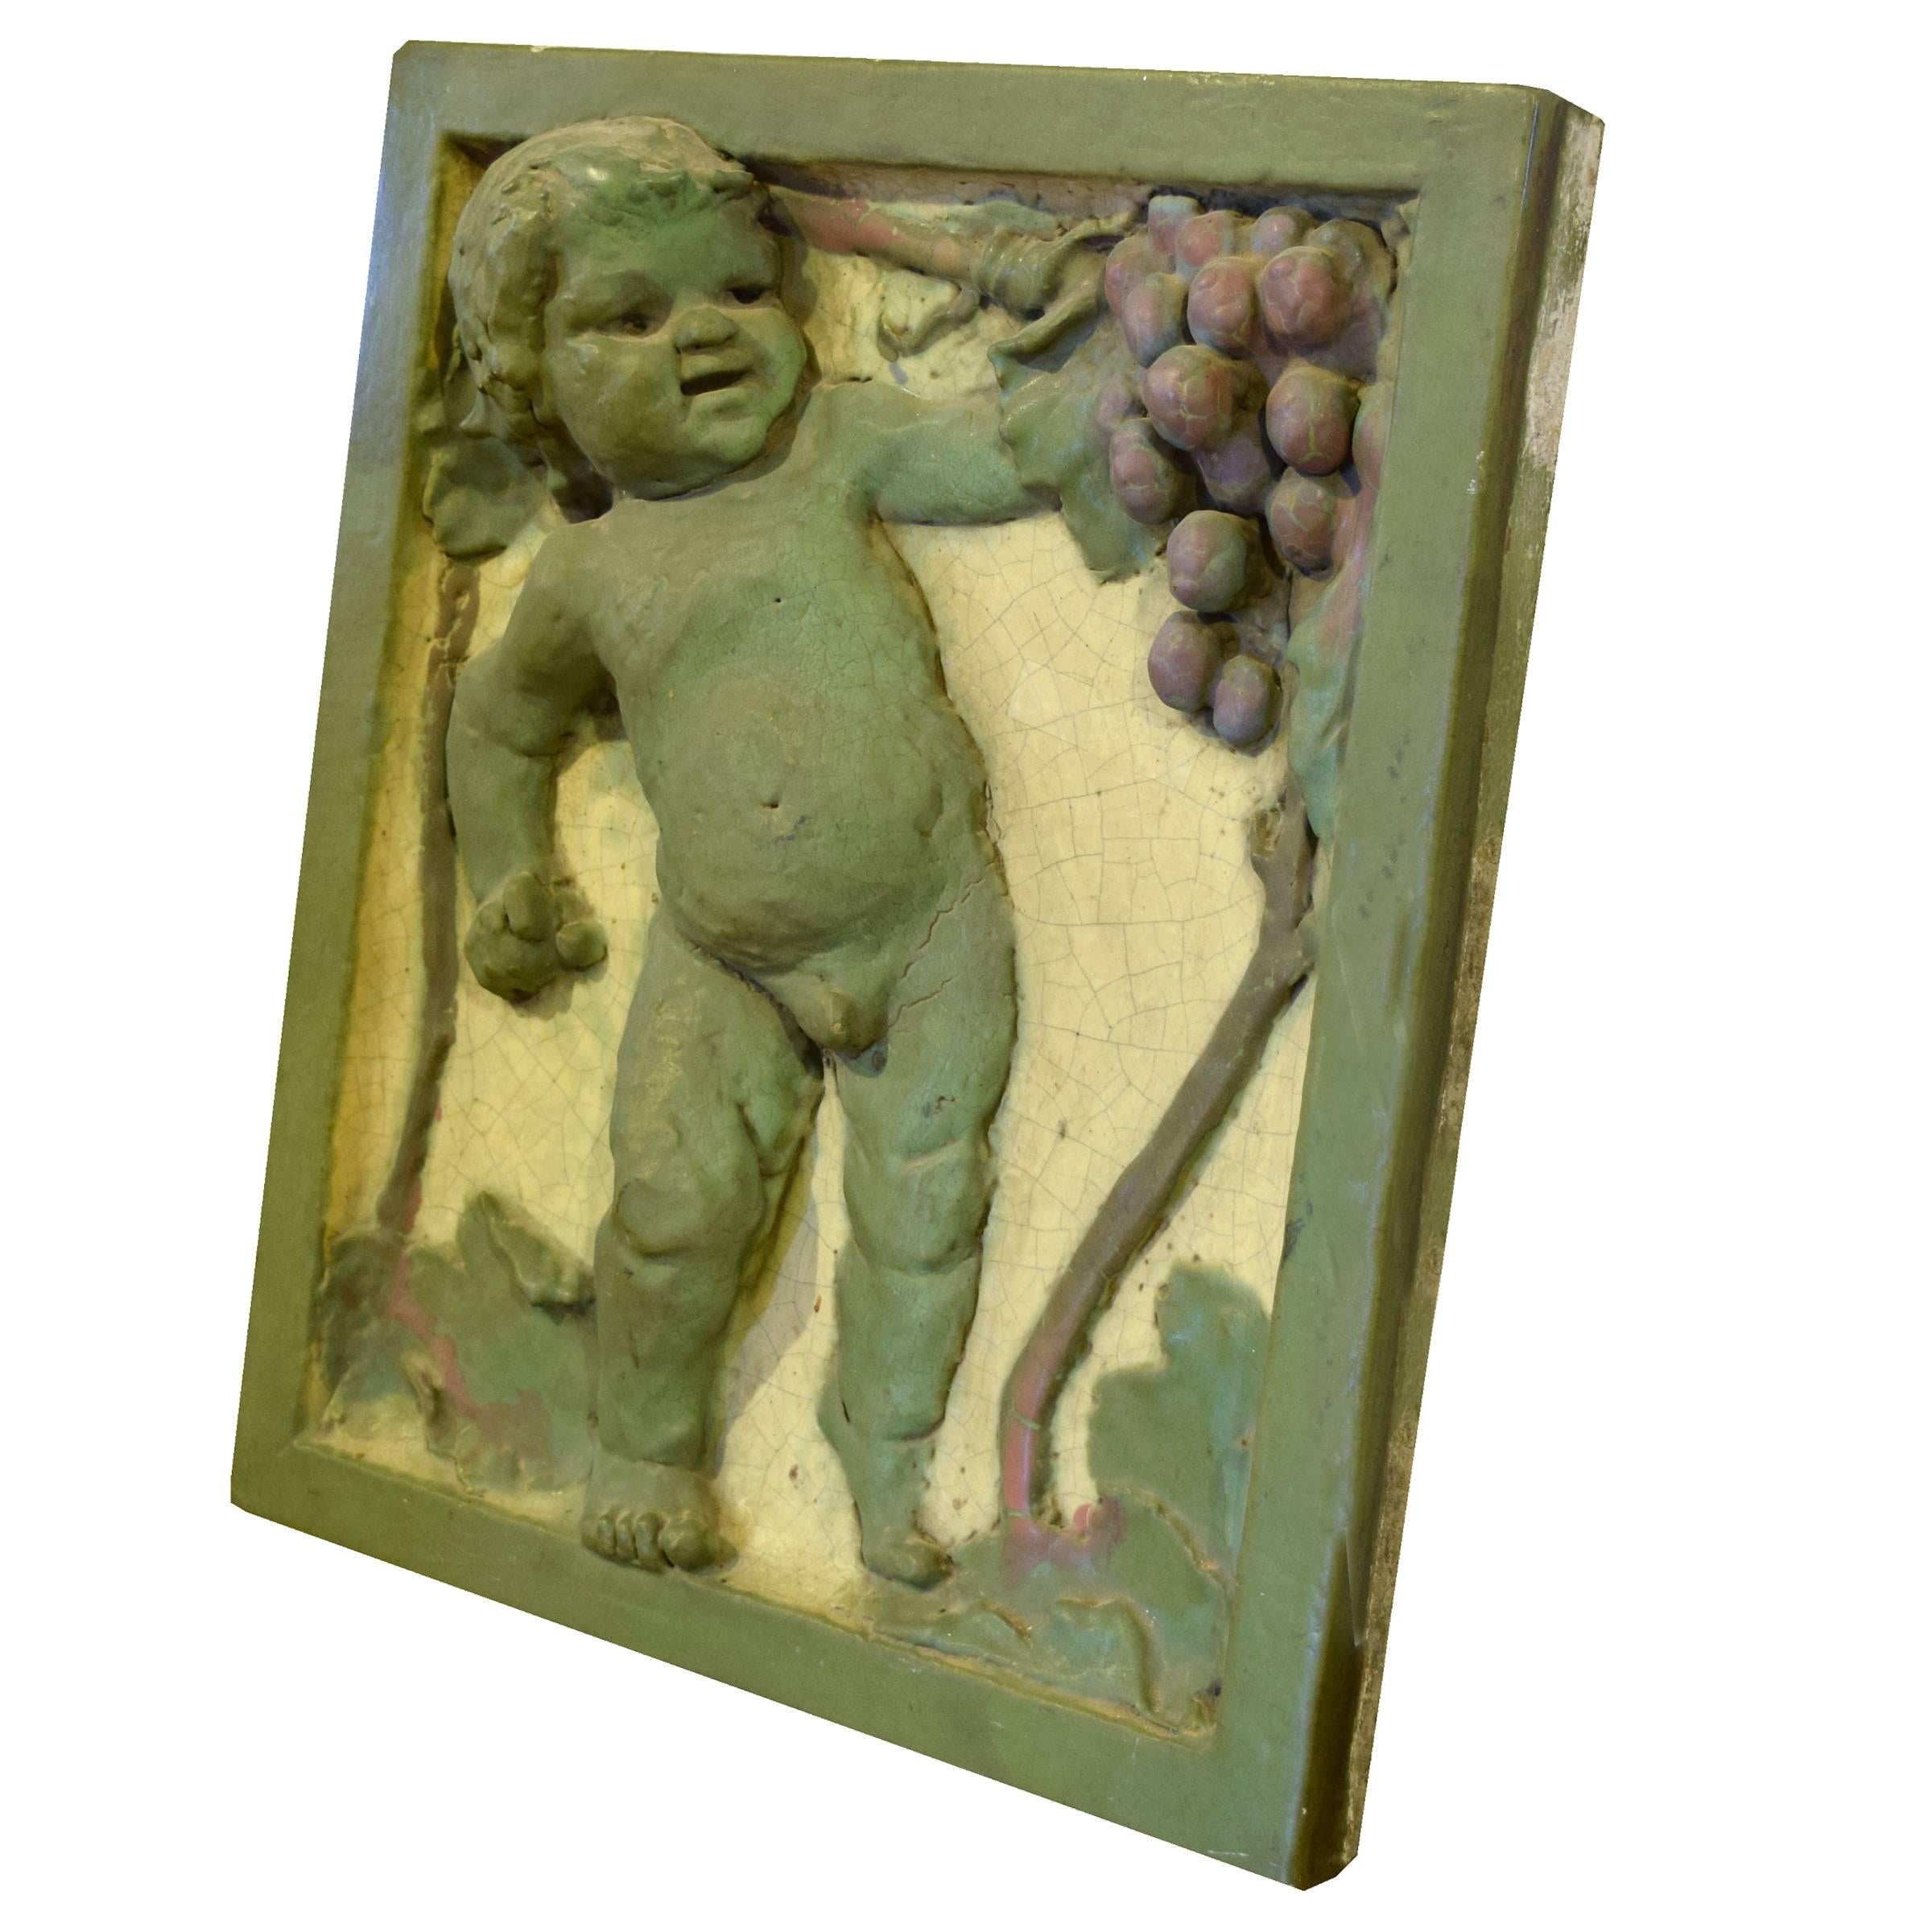 American polychrome interior terracotta tile by the Rookwood Pottery Co. depicting a young boy grasping grapes, from the German Grille in the LaSalle Hotel in Chicago, Il. The LaSalle hotel was built in 1908 by Holabird & Roche and was razed in